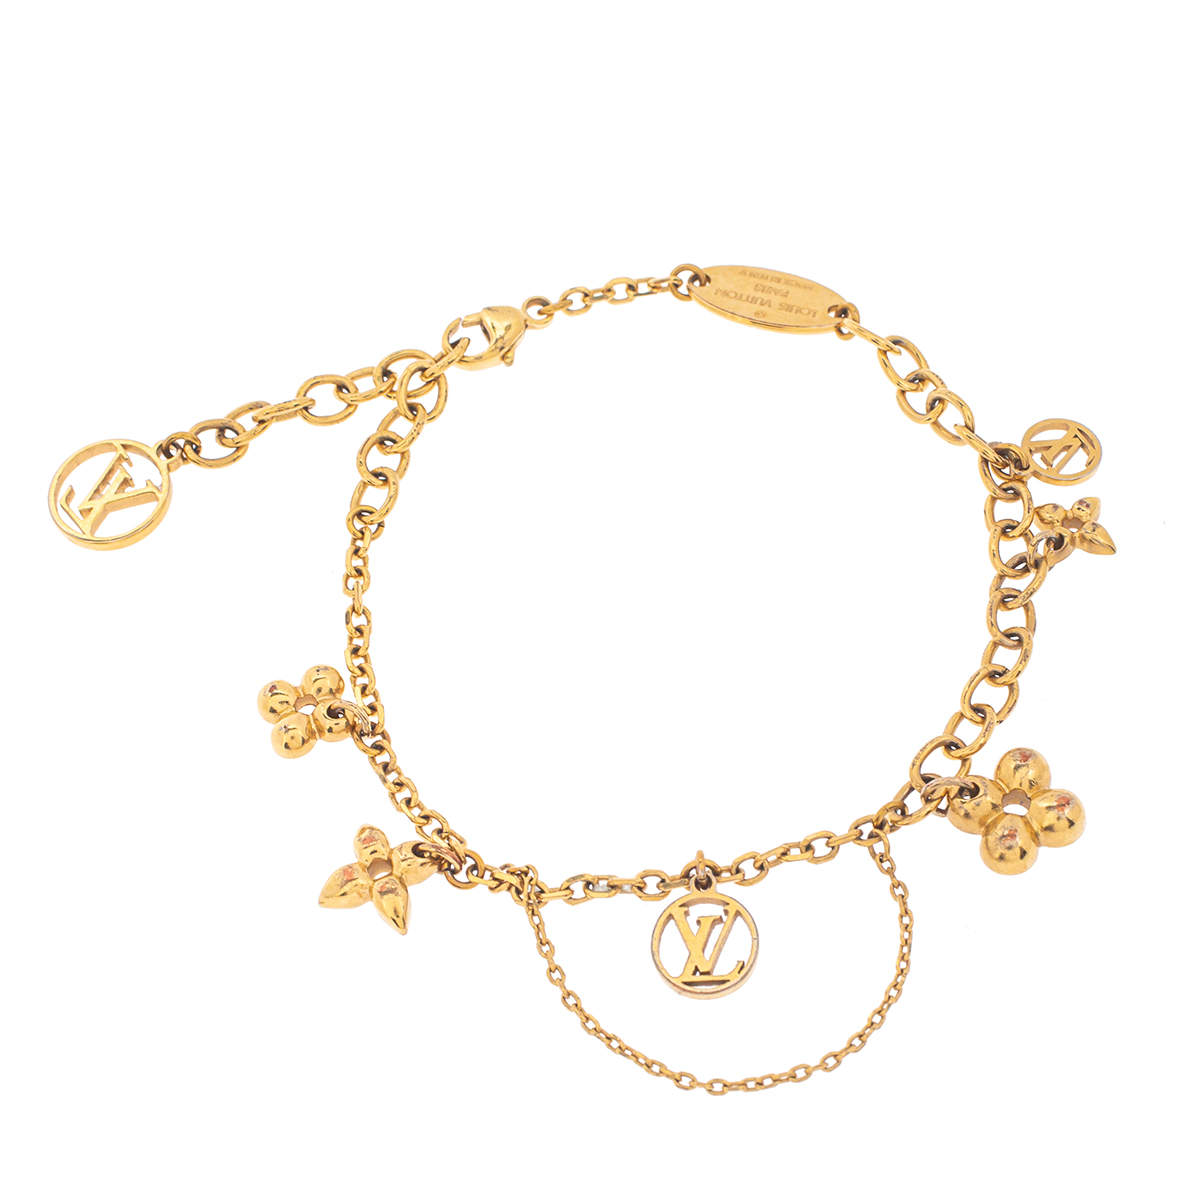 Louis Vuitton Blooming Supple Bracelet Metal with Crystals Gold 1476812